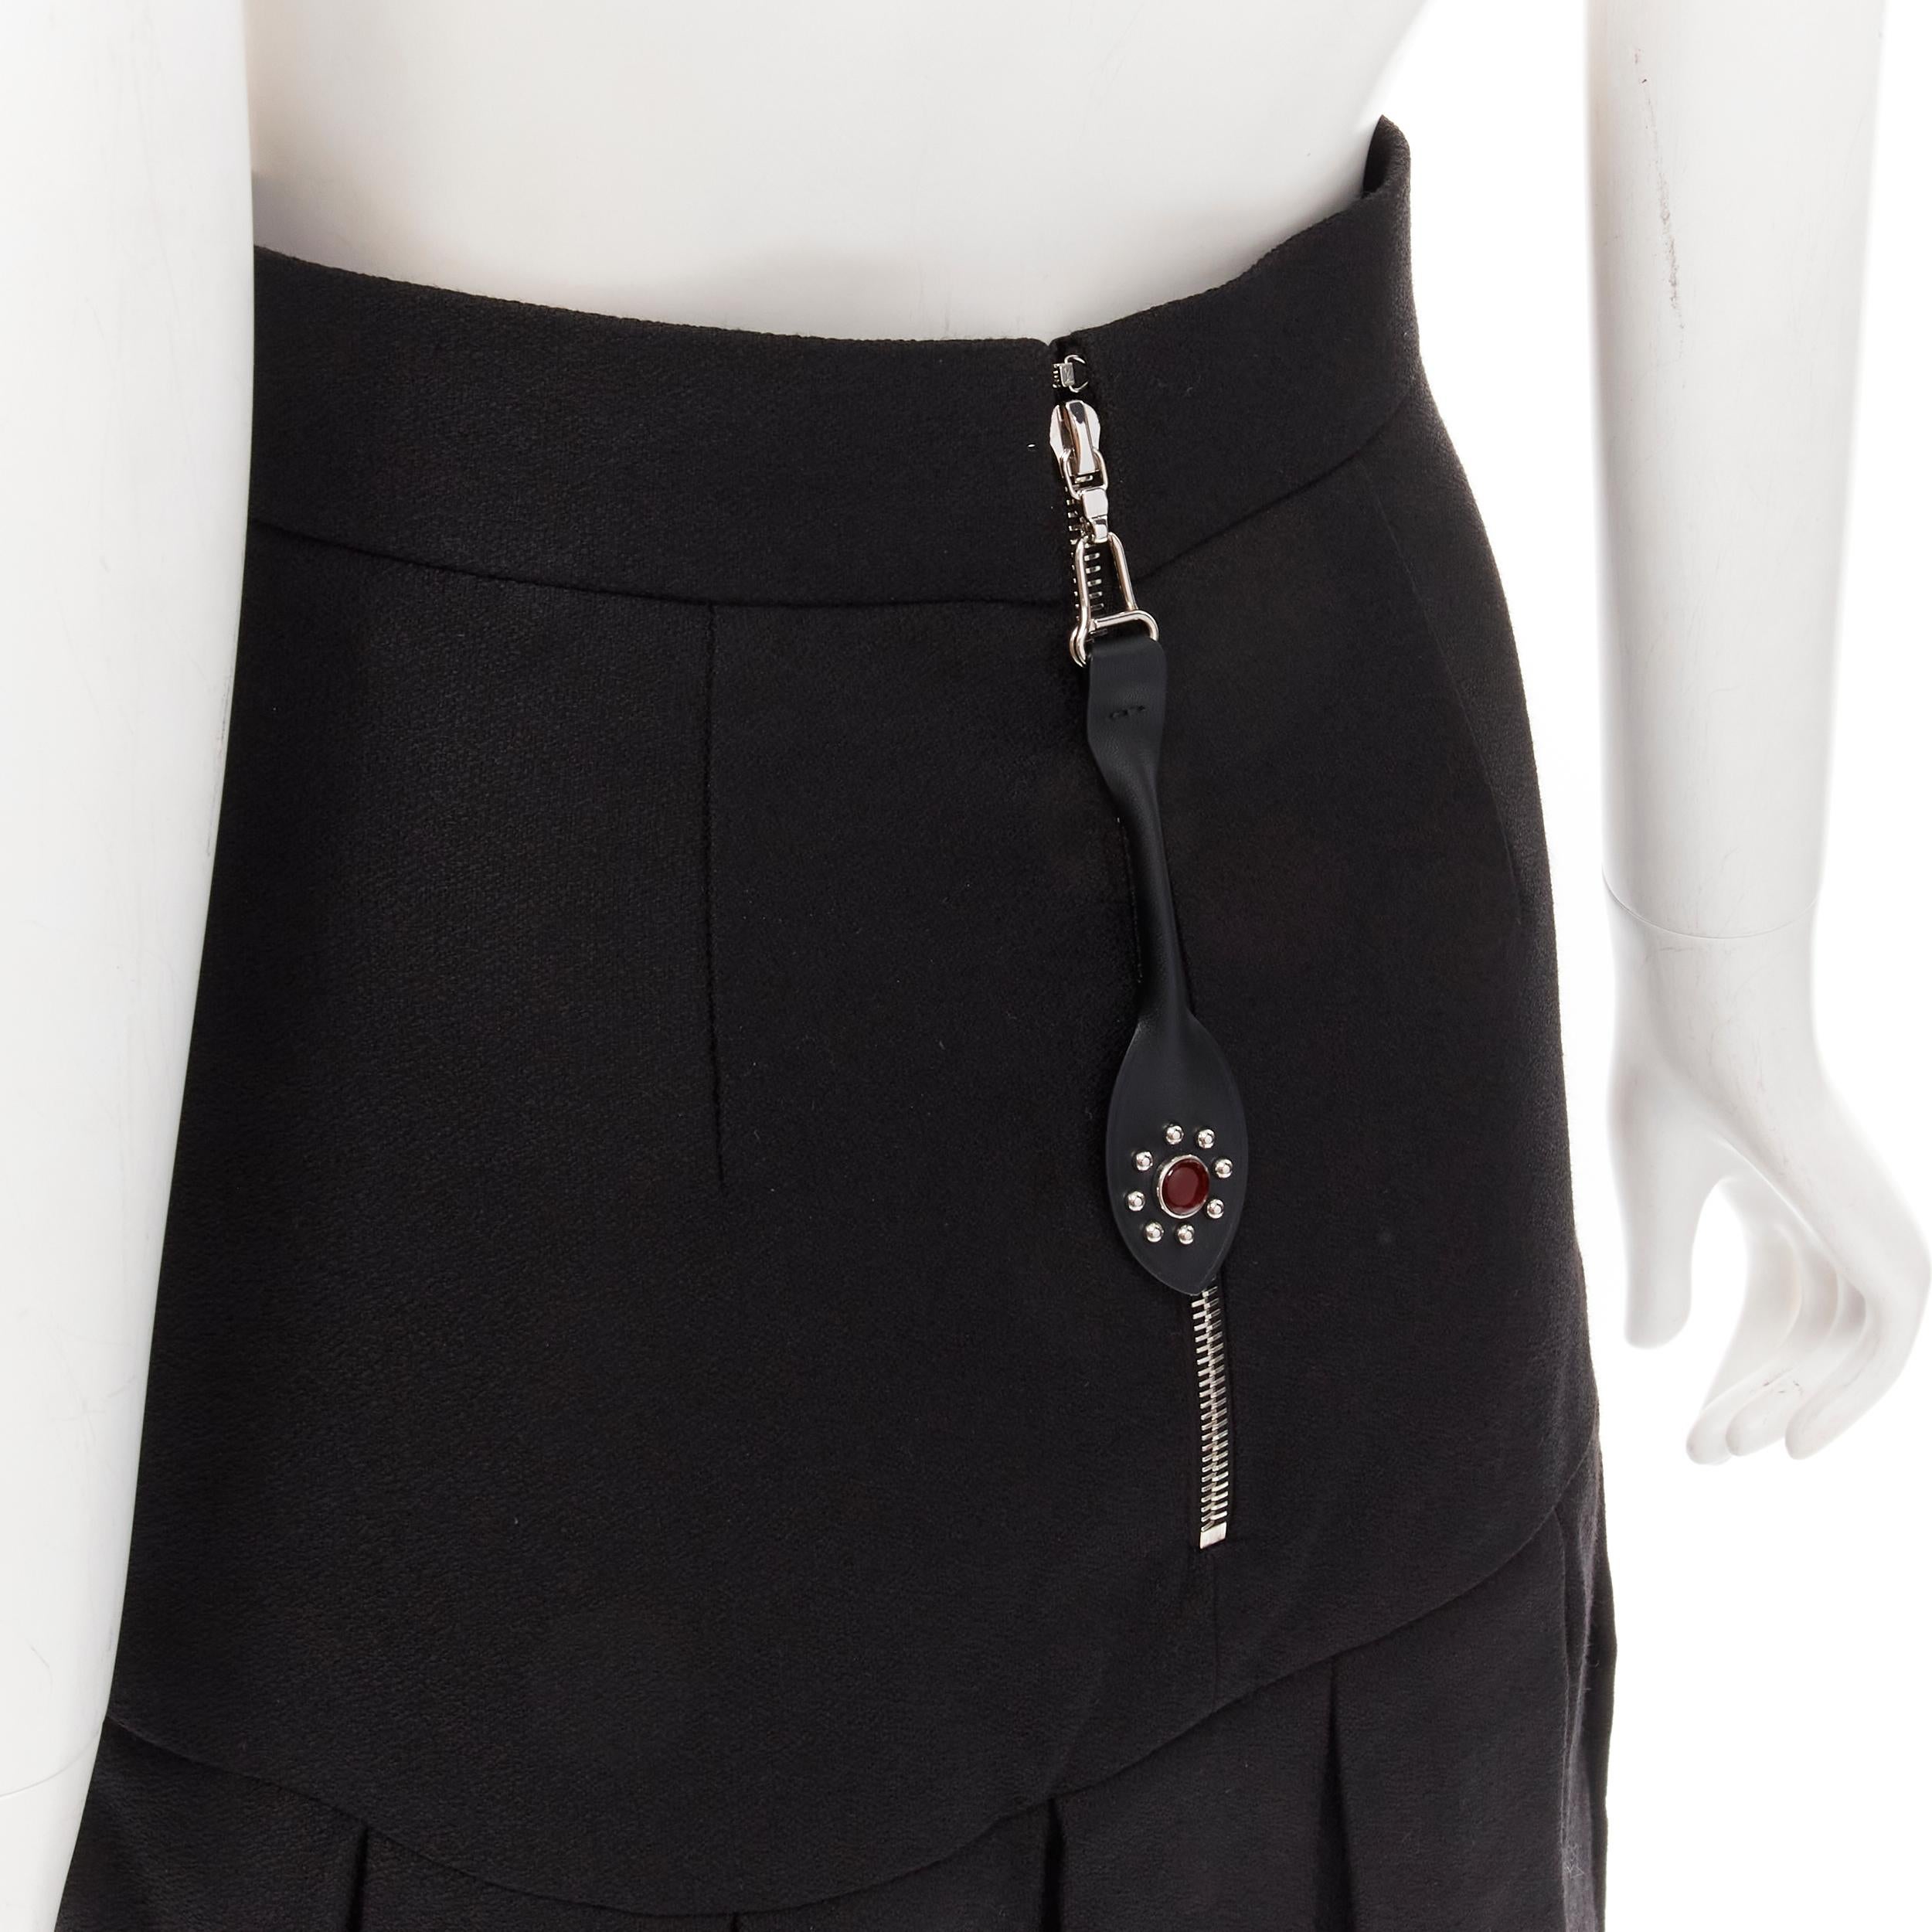 LOUIS VUITTON 2021 Runway black wool silk crepe fringe flapper skirt FR34 XS
Brand: Louis Vuitton
Designer: Nicolas Ghesquiere
Collection: 2021 
Material: Wool
Color: Black
Pattern: Solid
Closure: Zip
Extra Detail: Red jewel rhinestone studded